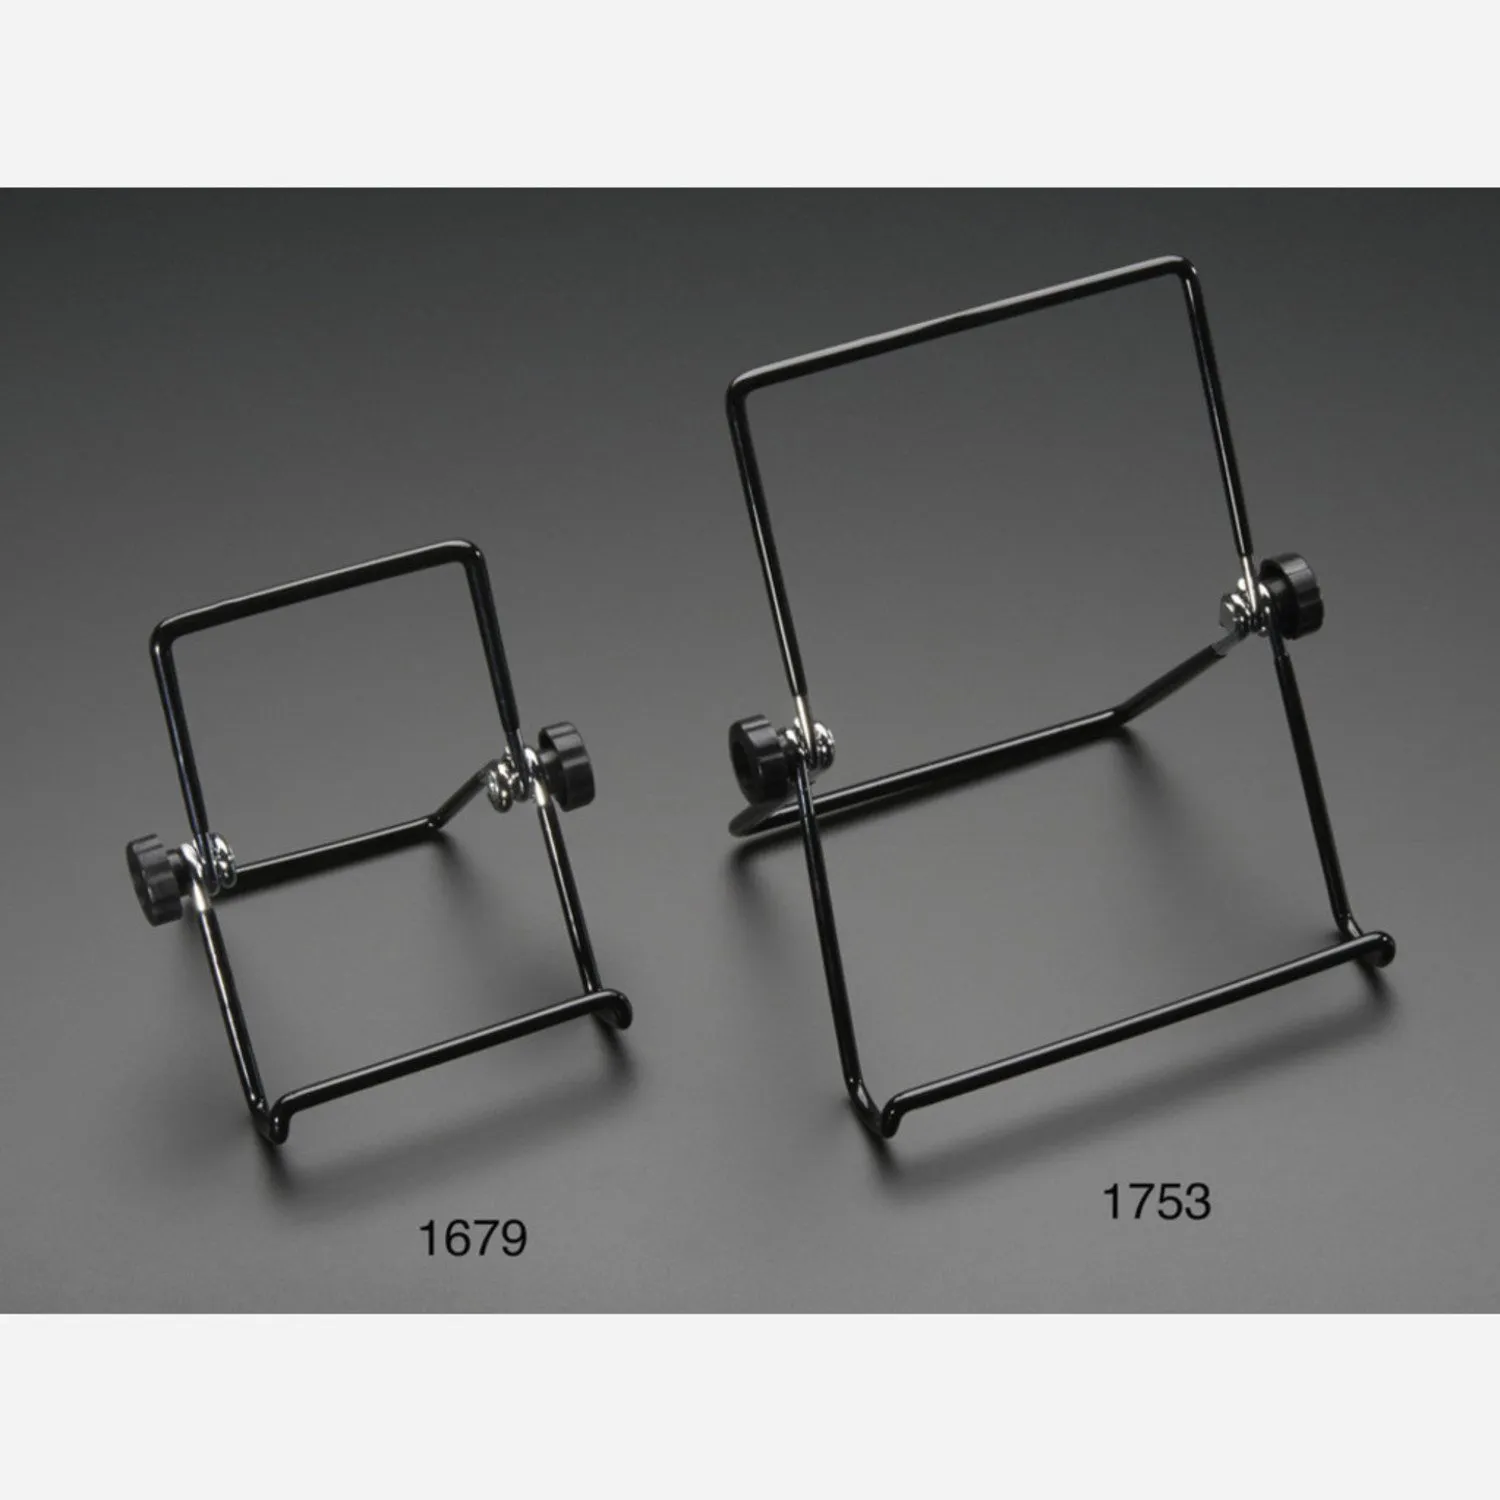 Photo of Adjustable Bent-Wire Stand for 8-10 Tablets and Displays